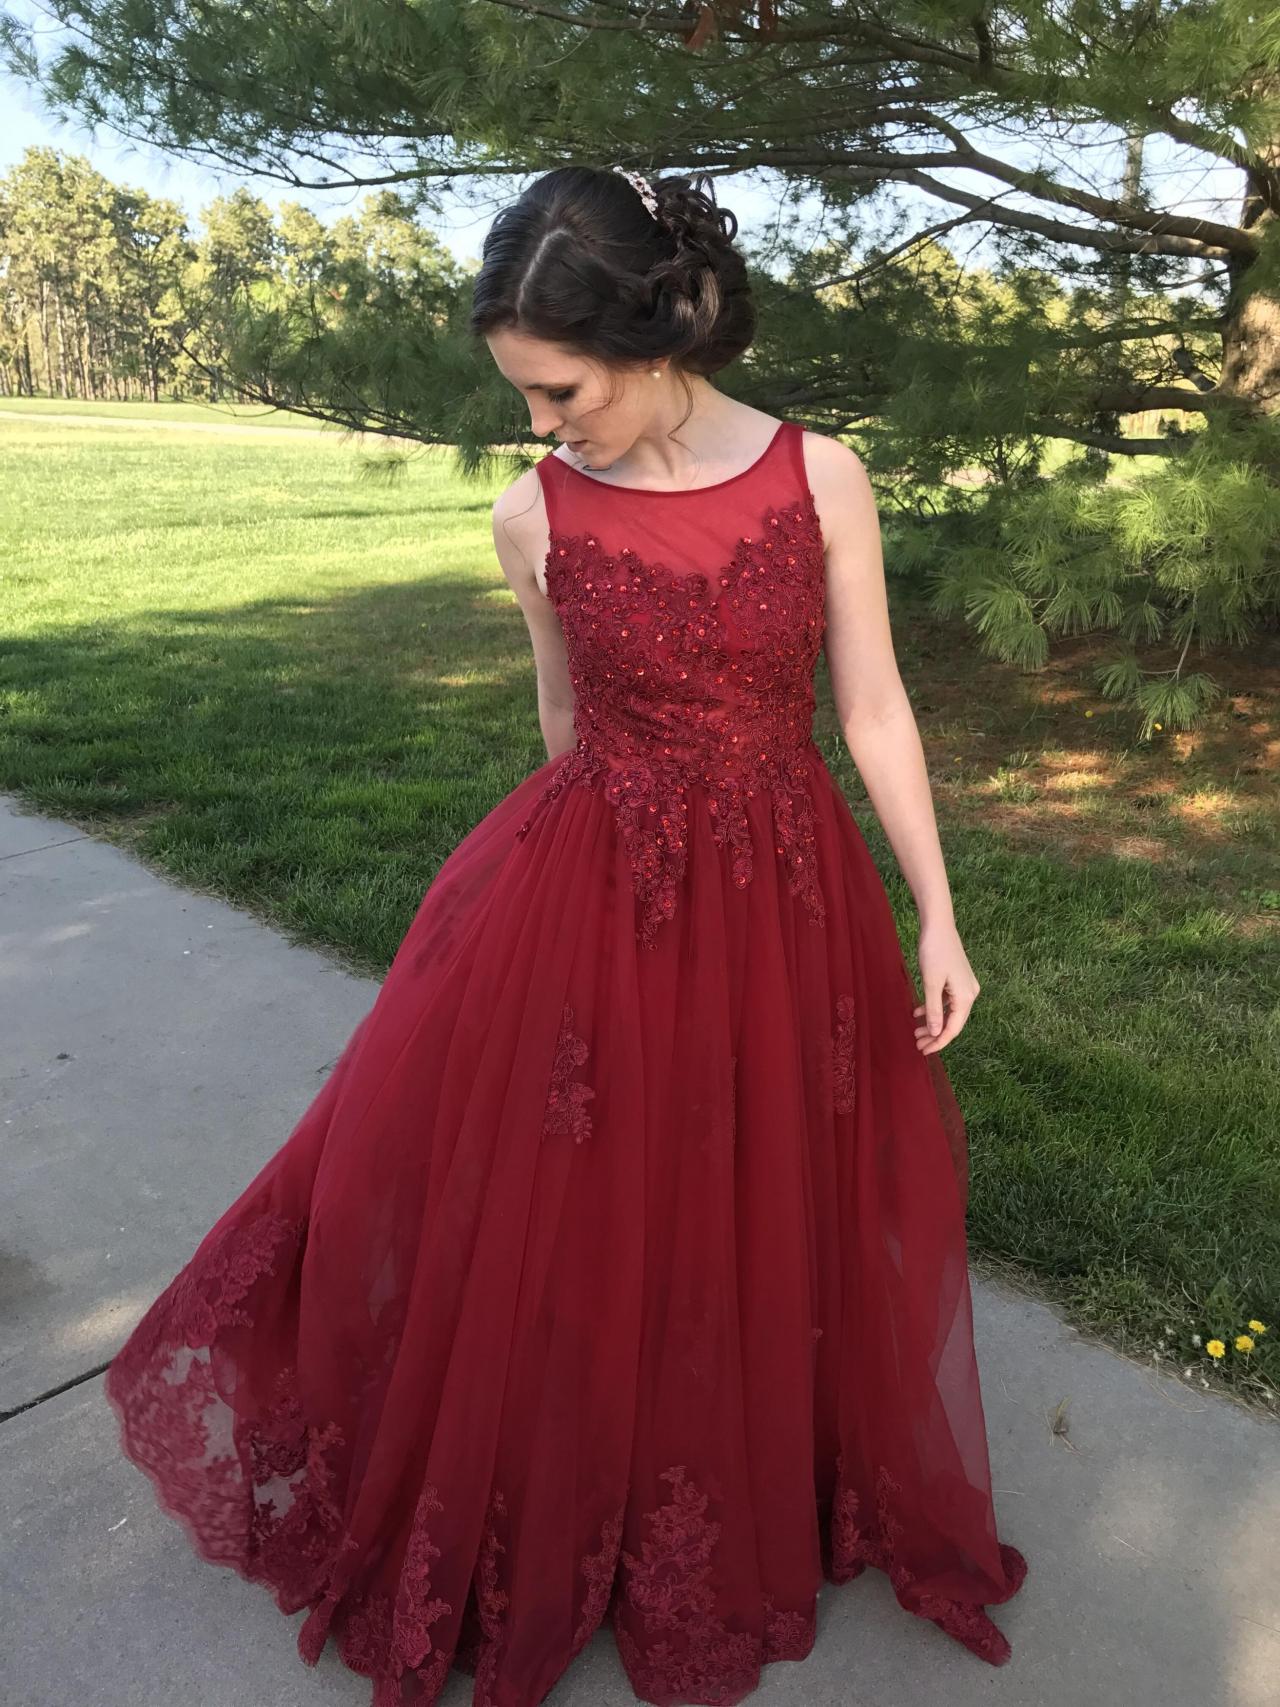 Ulass Burgundy Prom Dresses,pink Prom Dresses,lace Prom Dreases,formal Dresses,sweep Train Prom Dresses,formal Dresses 2018